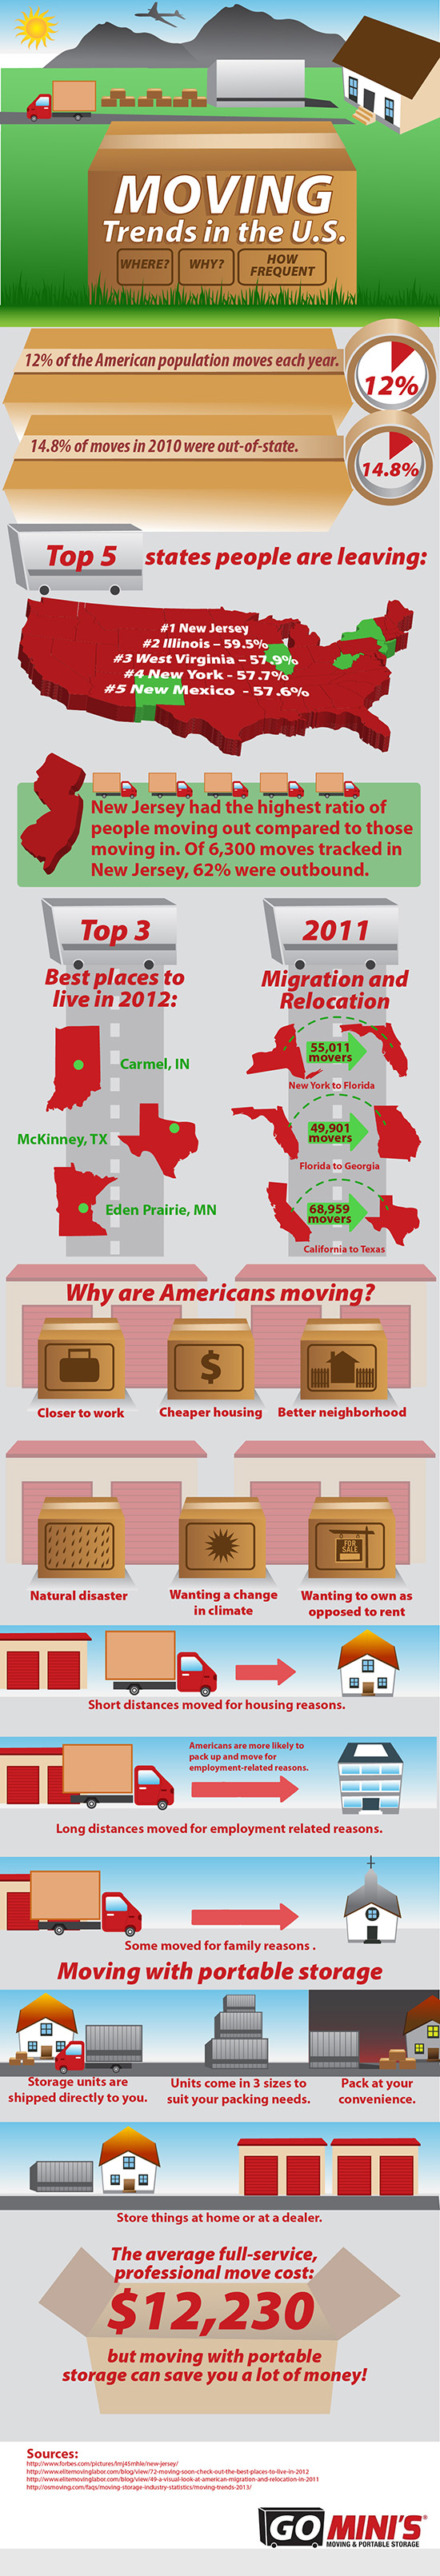 moving public storage buying a home